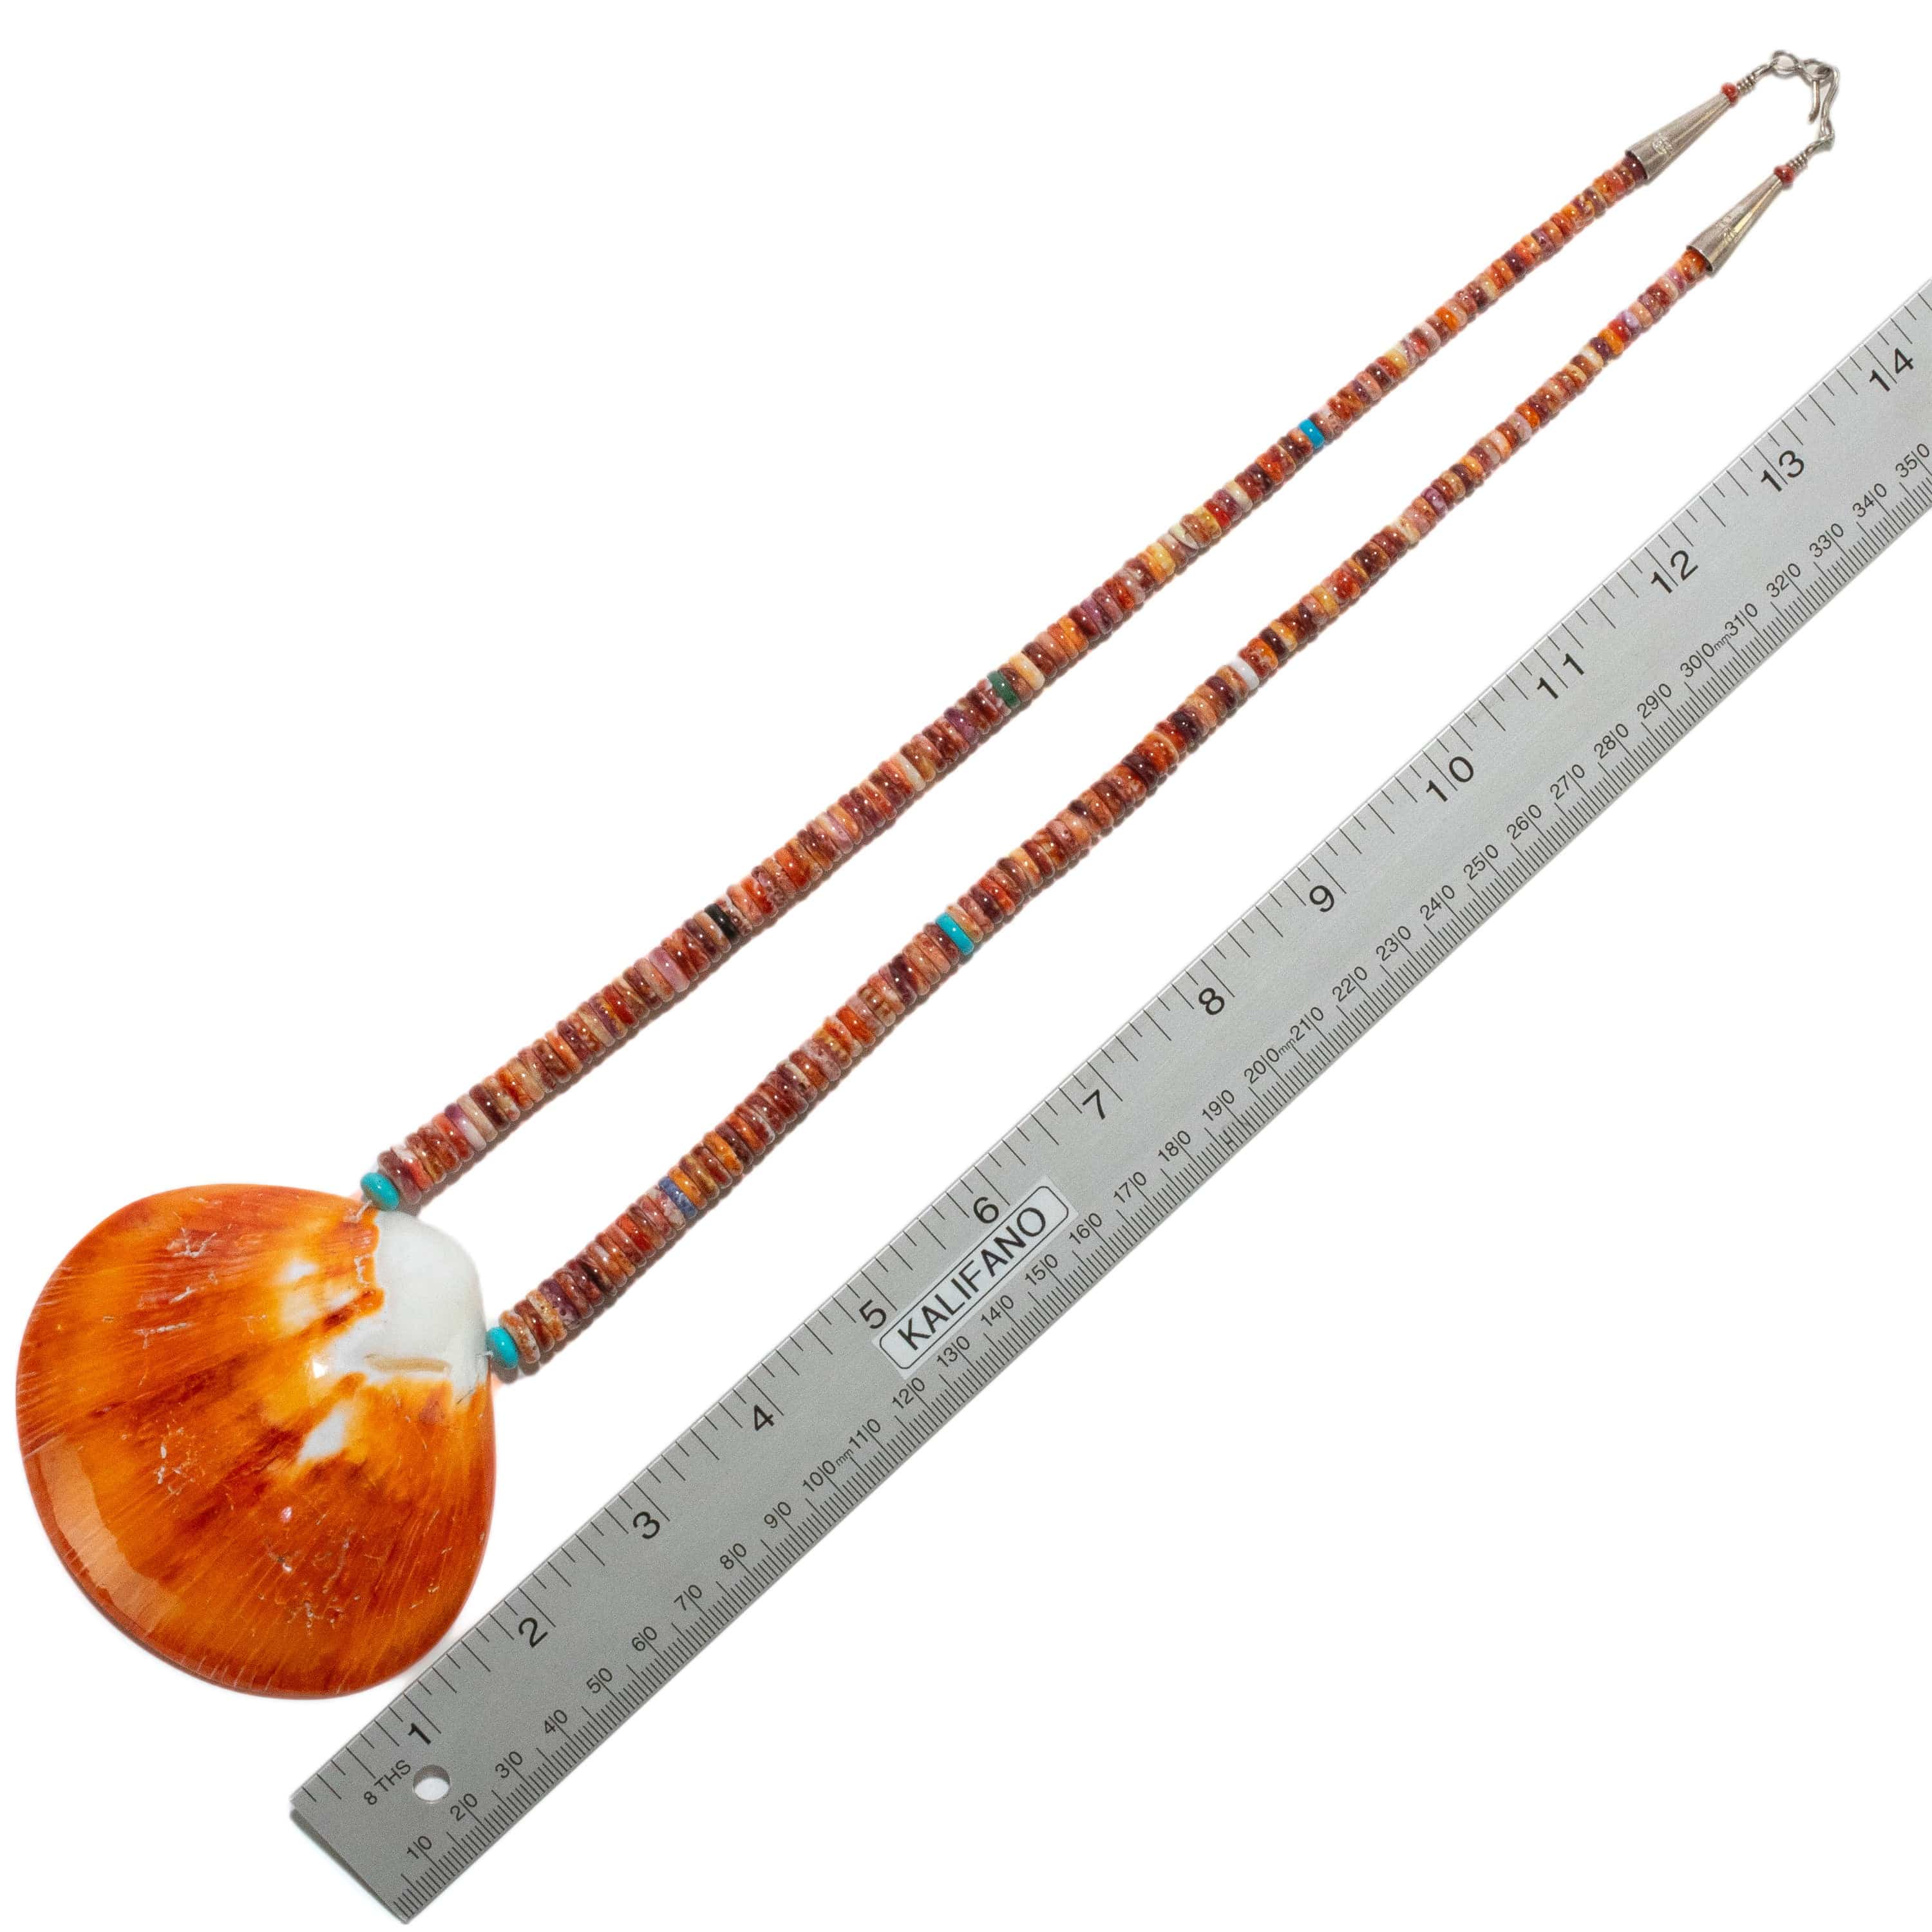 Kalifano Native American Jewelry 26" Orange Spiny Oyster Shell & Turquoise USA Native American Made 925 Sterling Silver Heishi Bead Necklace NAN1200.022